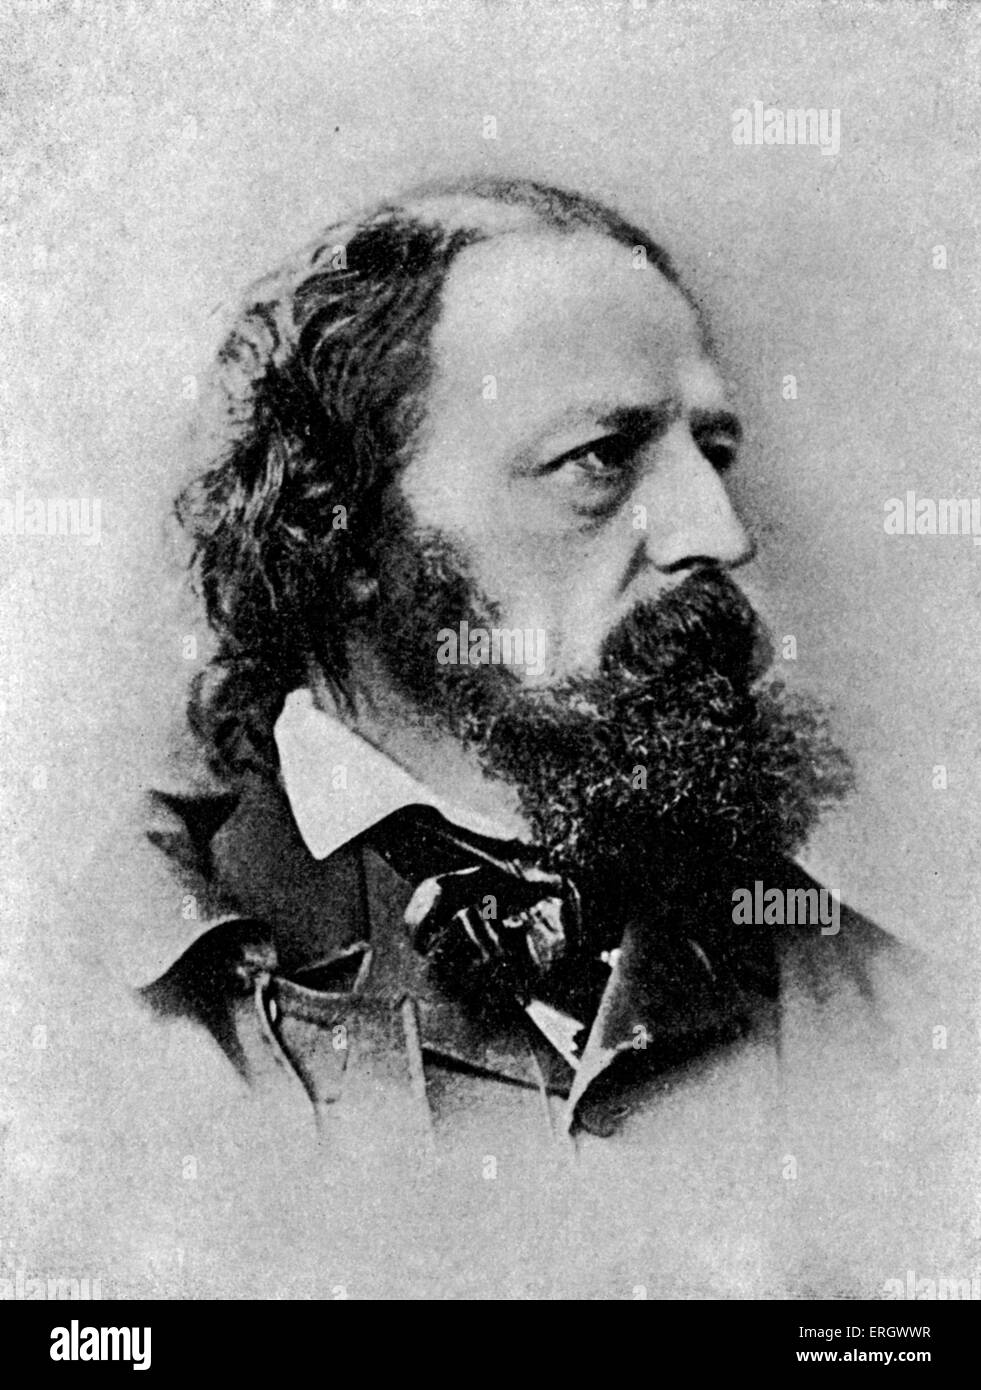 Alfred Lord Tennyson - portrait. English poet laureate. 1809-1892.  popular Victorian poet. Author of The Lady of Shallott. Stock Photo